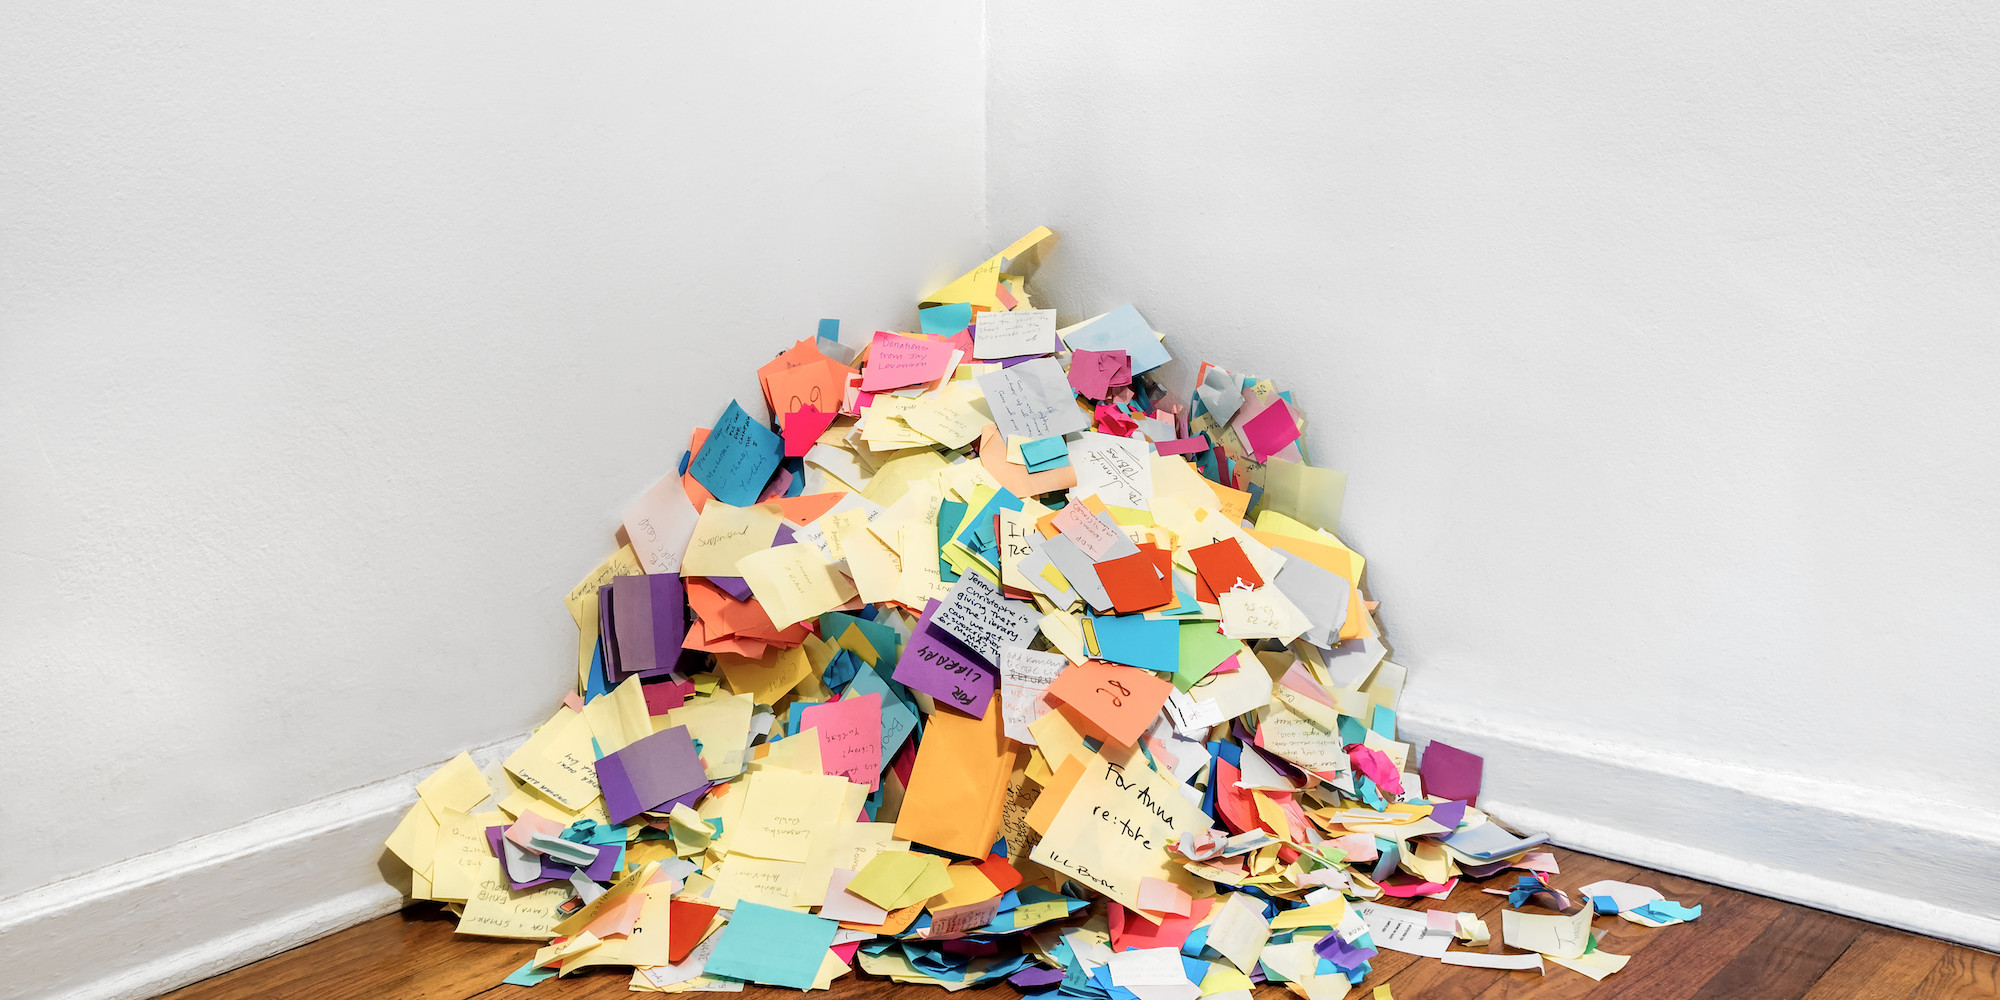 Post-its discarded by library researchers. Photo: Alejandro Merizalde